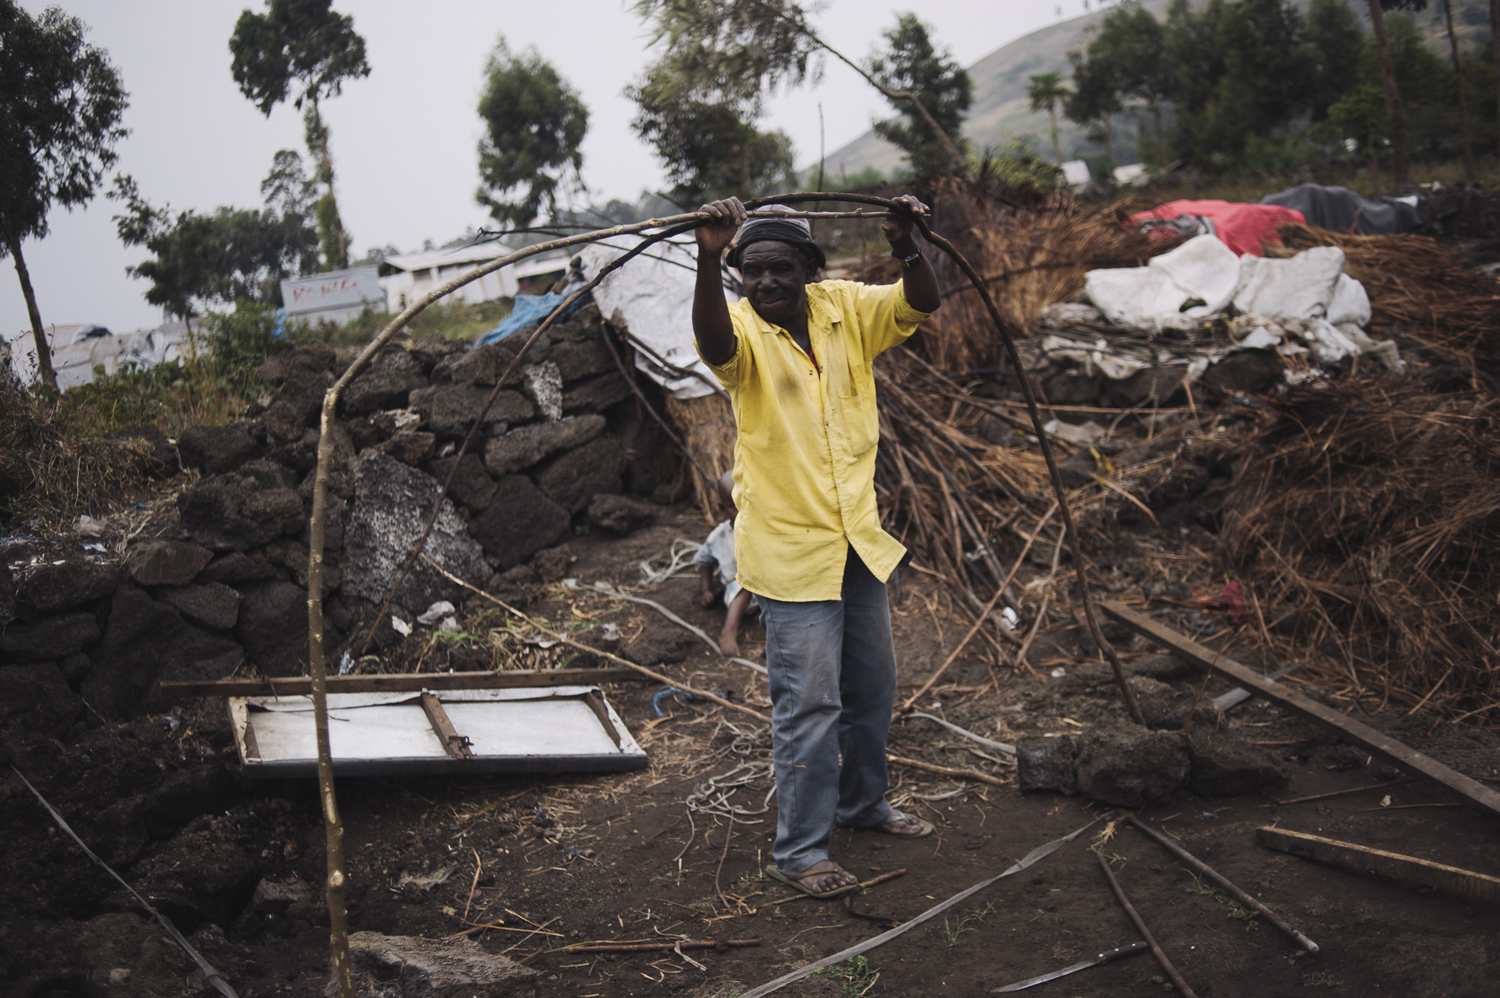 A displaced Congolese man rebuilds his makeshift shelter from sticks and volcanic rock in the Bulengo site for the internally displaced. Many of the original huts here were covered with grasses for the roofing, and many now have tarpaulin sheeting, which still provides only scant cover against the cold and the rain in the harsh environment of the camp, July 15, 2014.